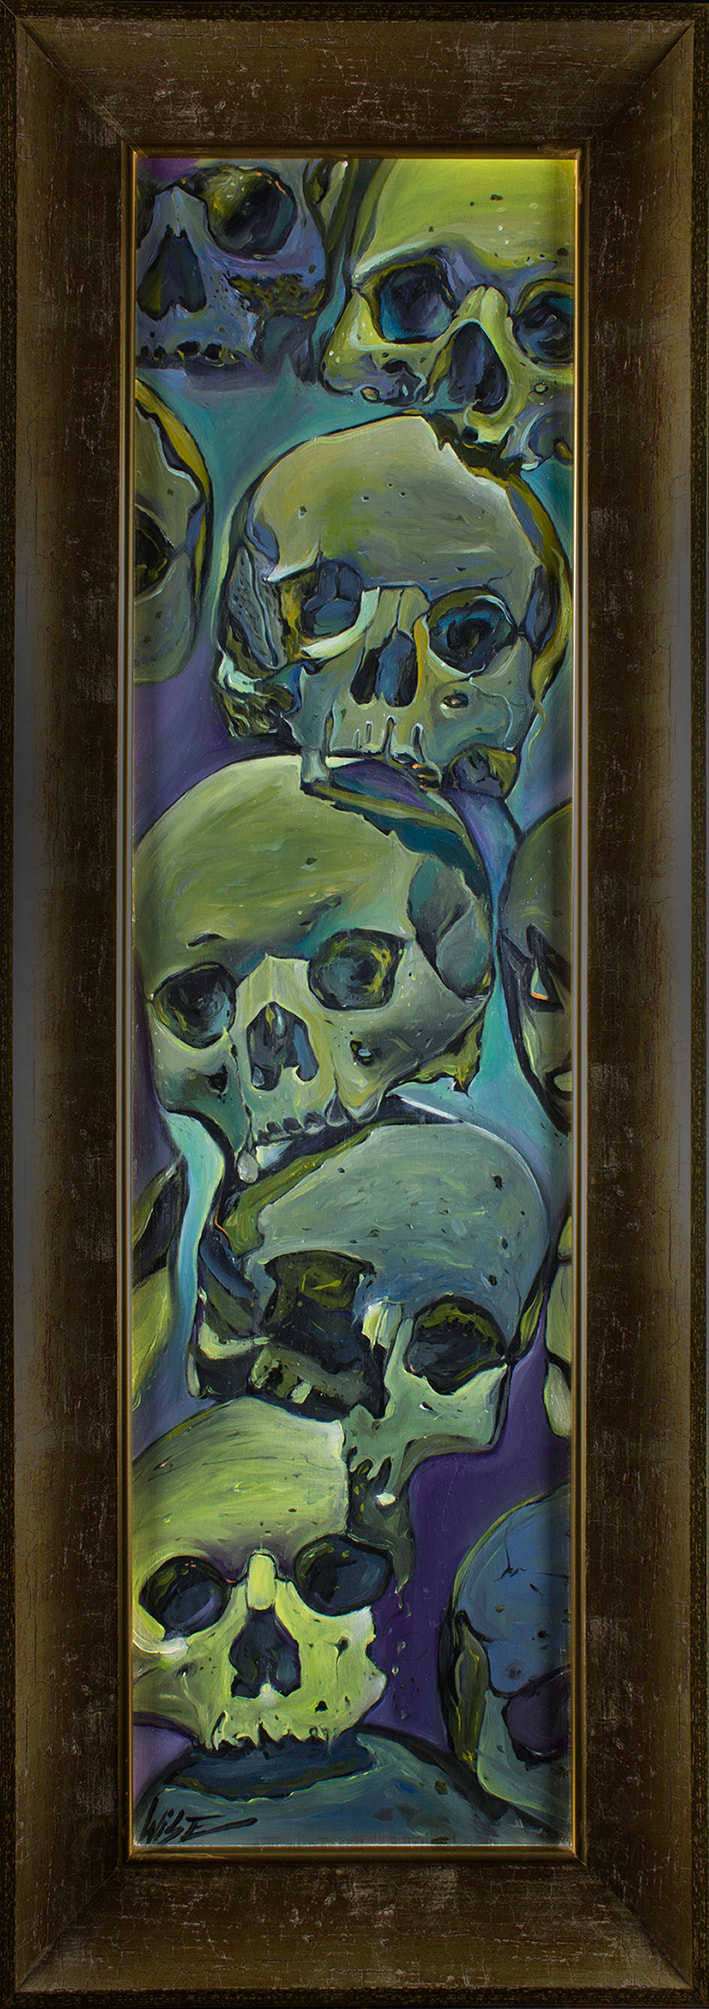 ''Catacombs''
By Wise Kid 
Oil painting on wooden panel
80/20 cm
2015
Available for purchase